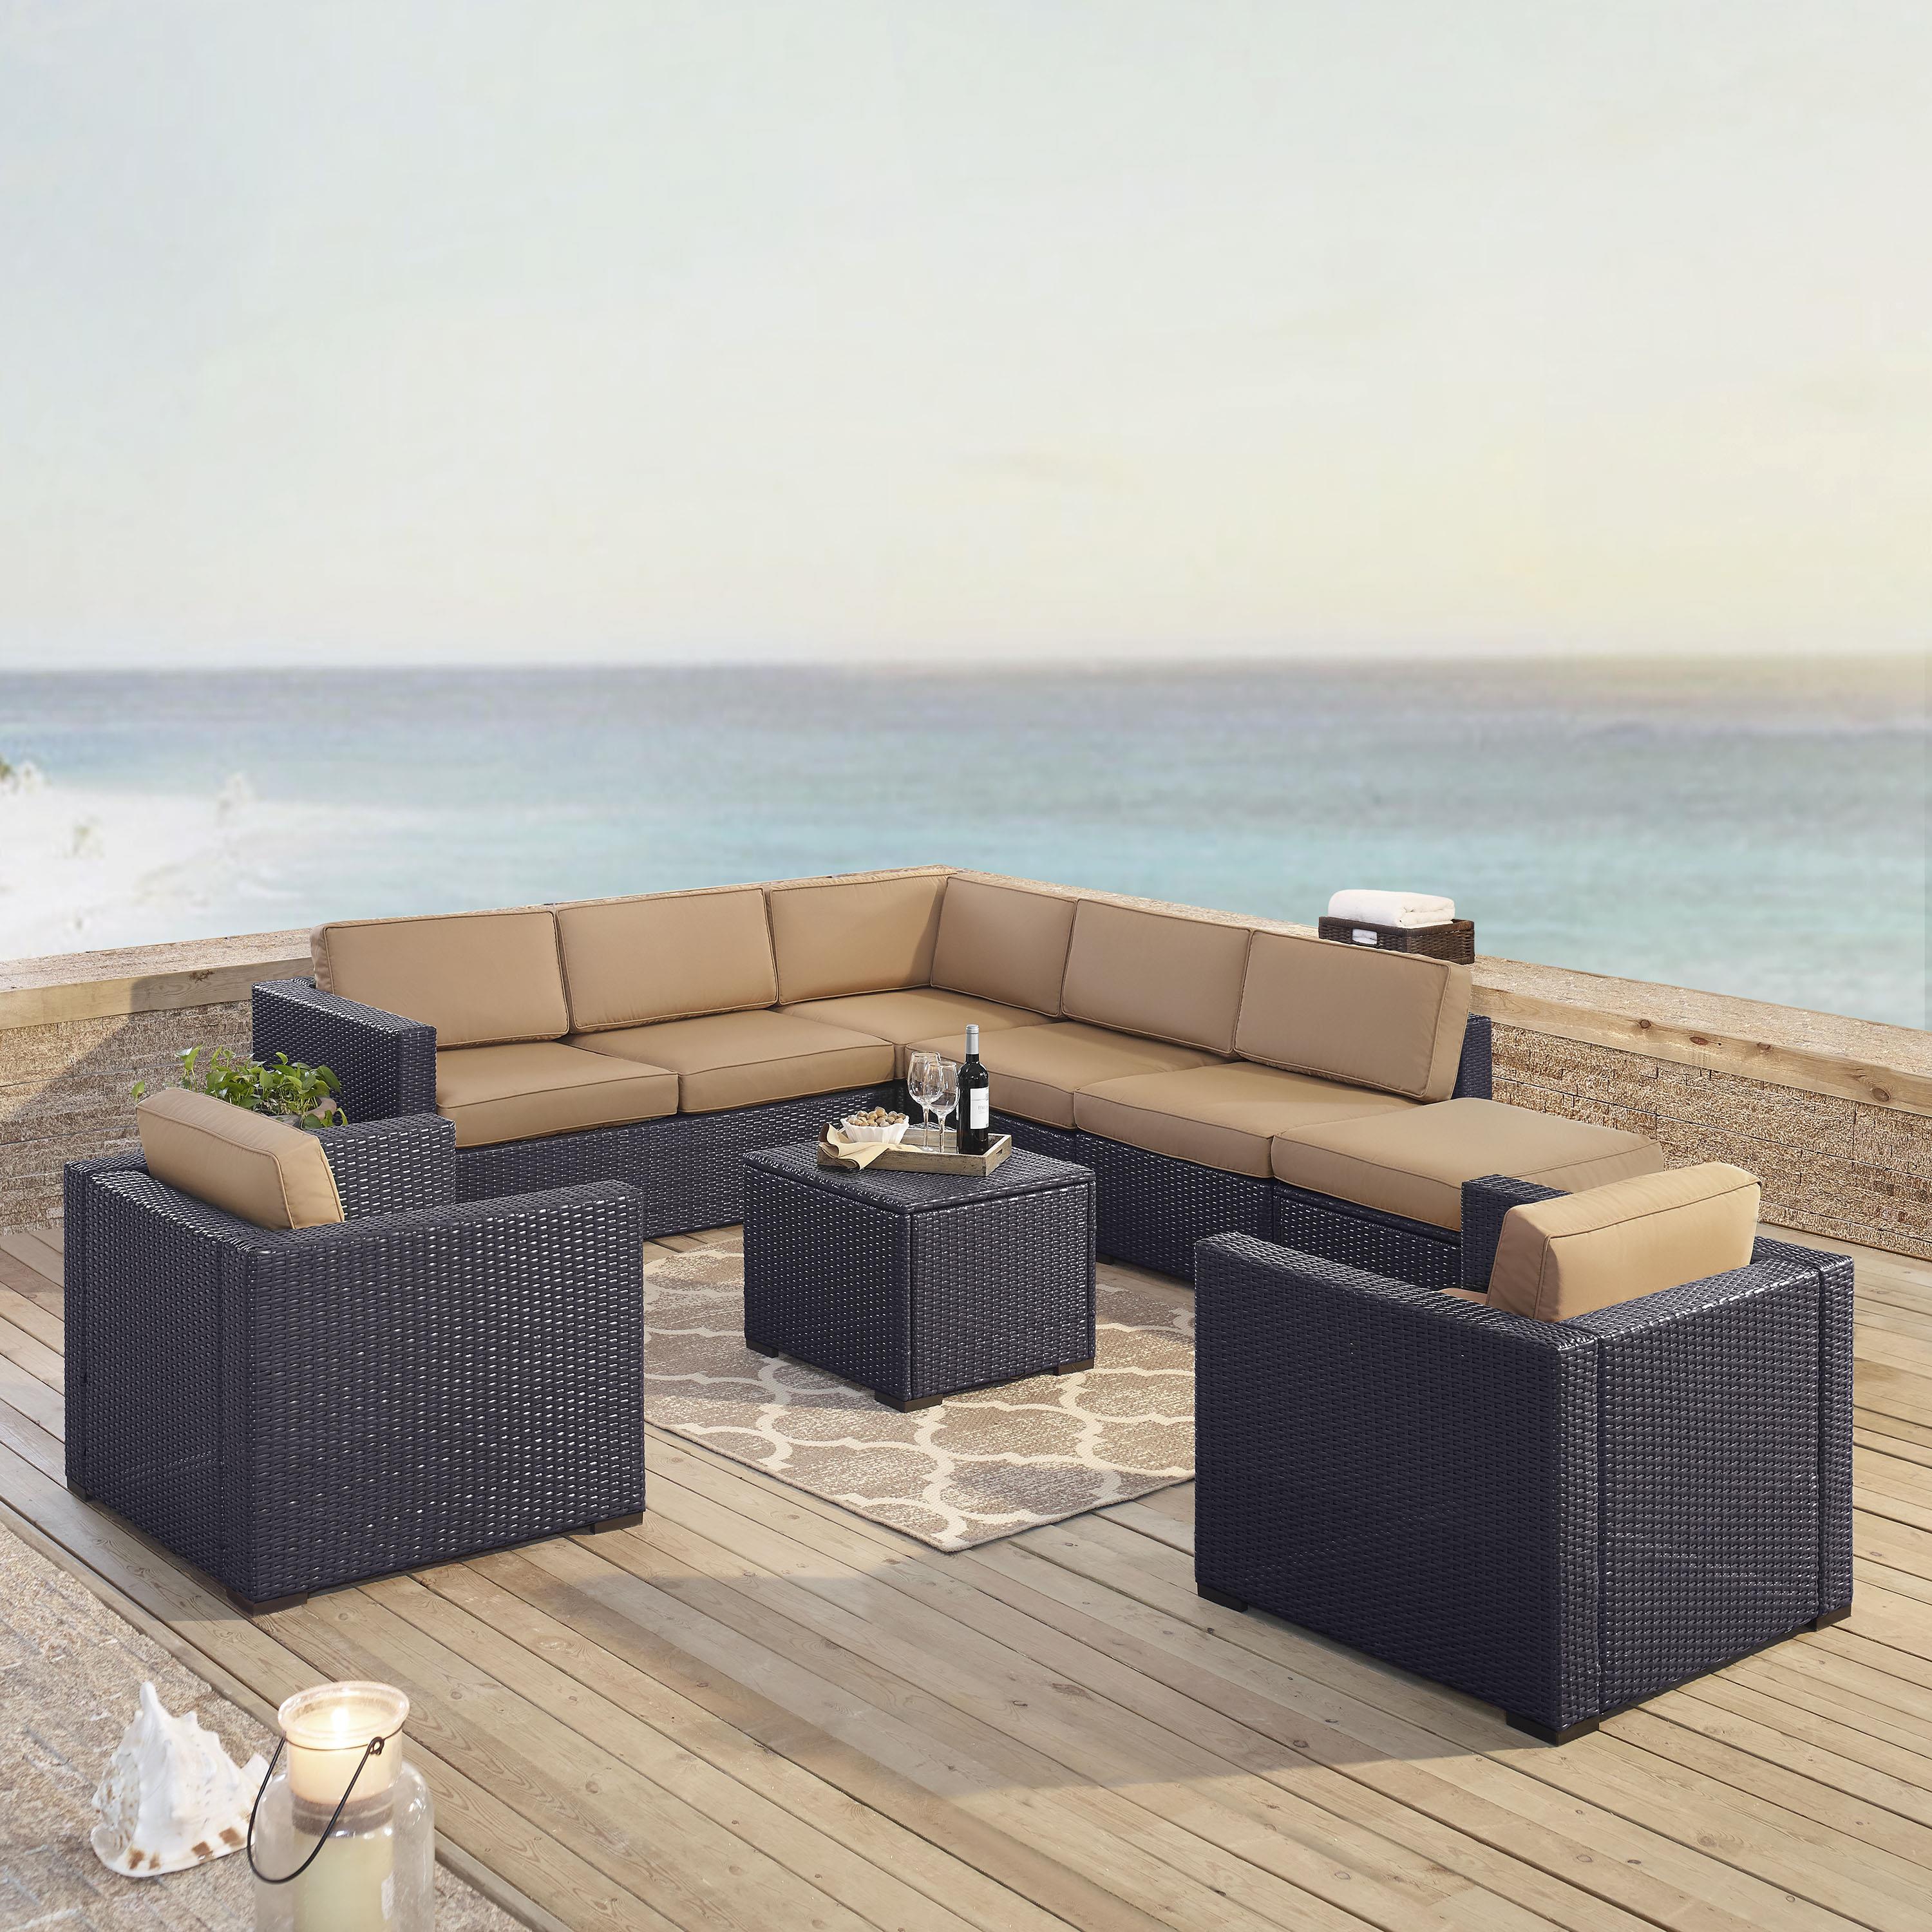 Crosley Furniture Biscayne 7 Piece Metal Patio Sectional Set in Brown/Mocha - image 4 of 4